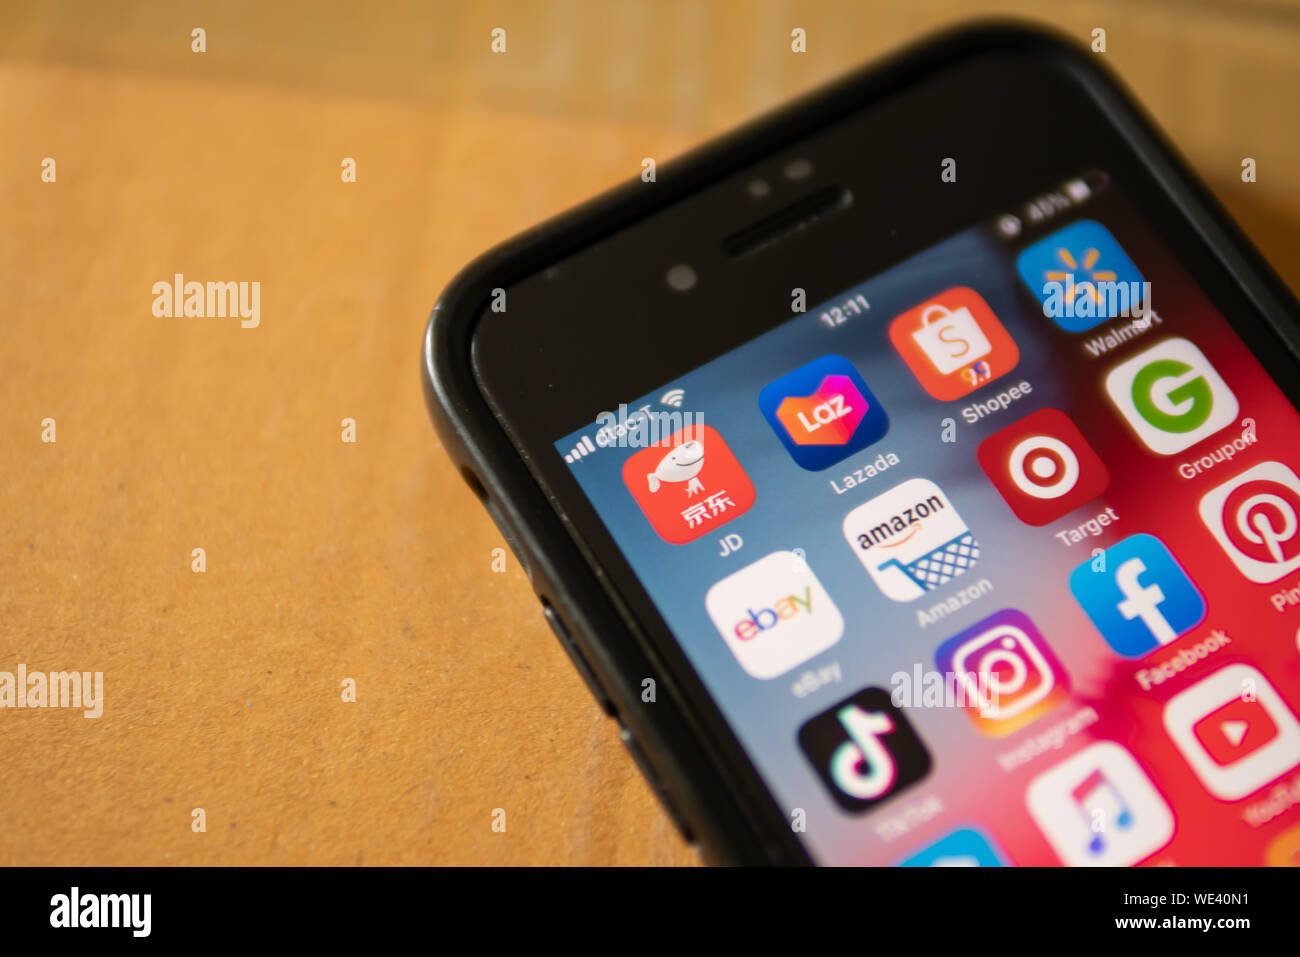 Bangkok, Thailand - August 22, 2019 : iPhone 7 showing its screen with JD, Chinese e-commerce application, Lazada, Shopee, Walmart, Ebay, Amazon and o Stock Photo